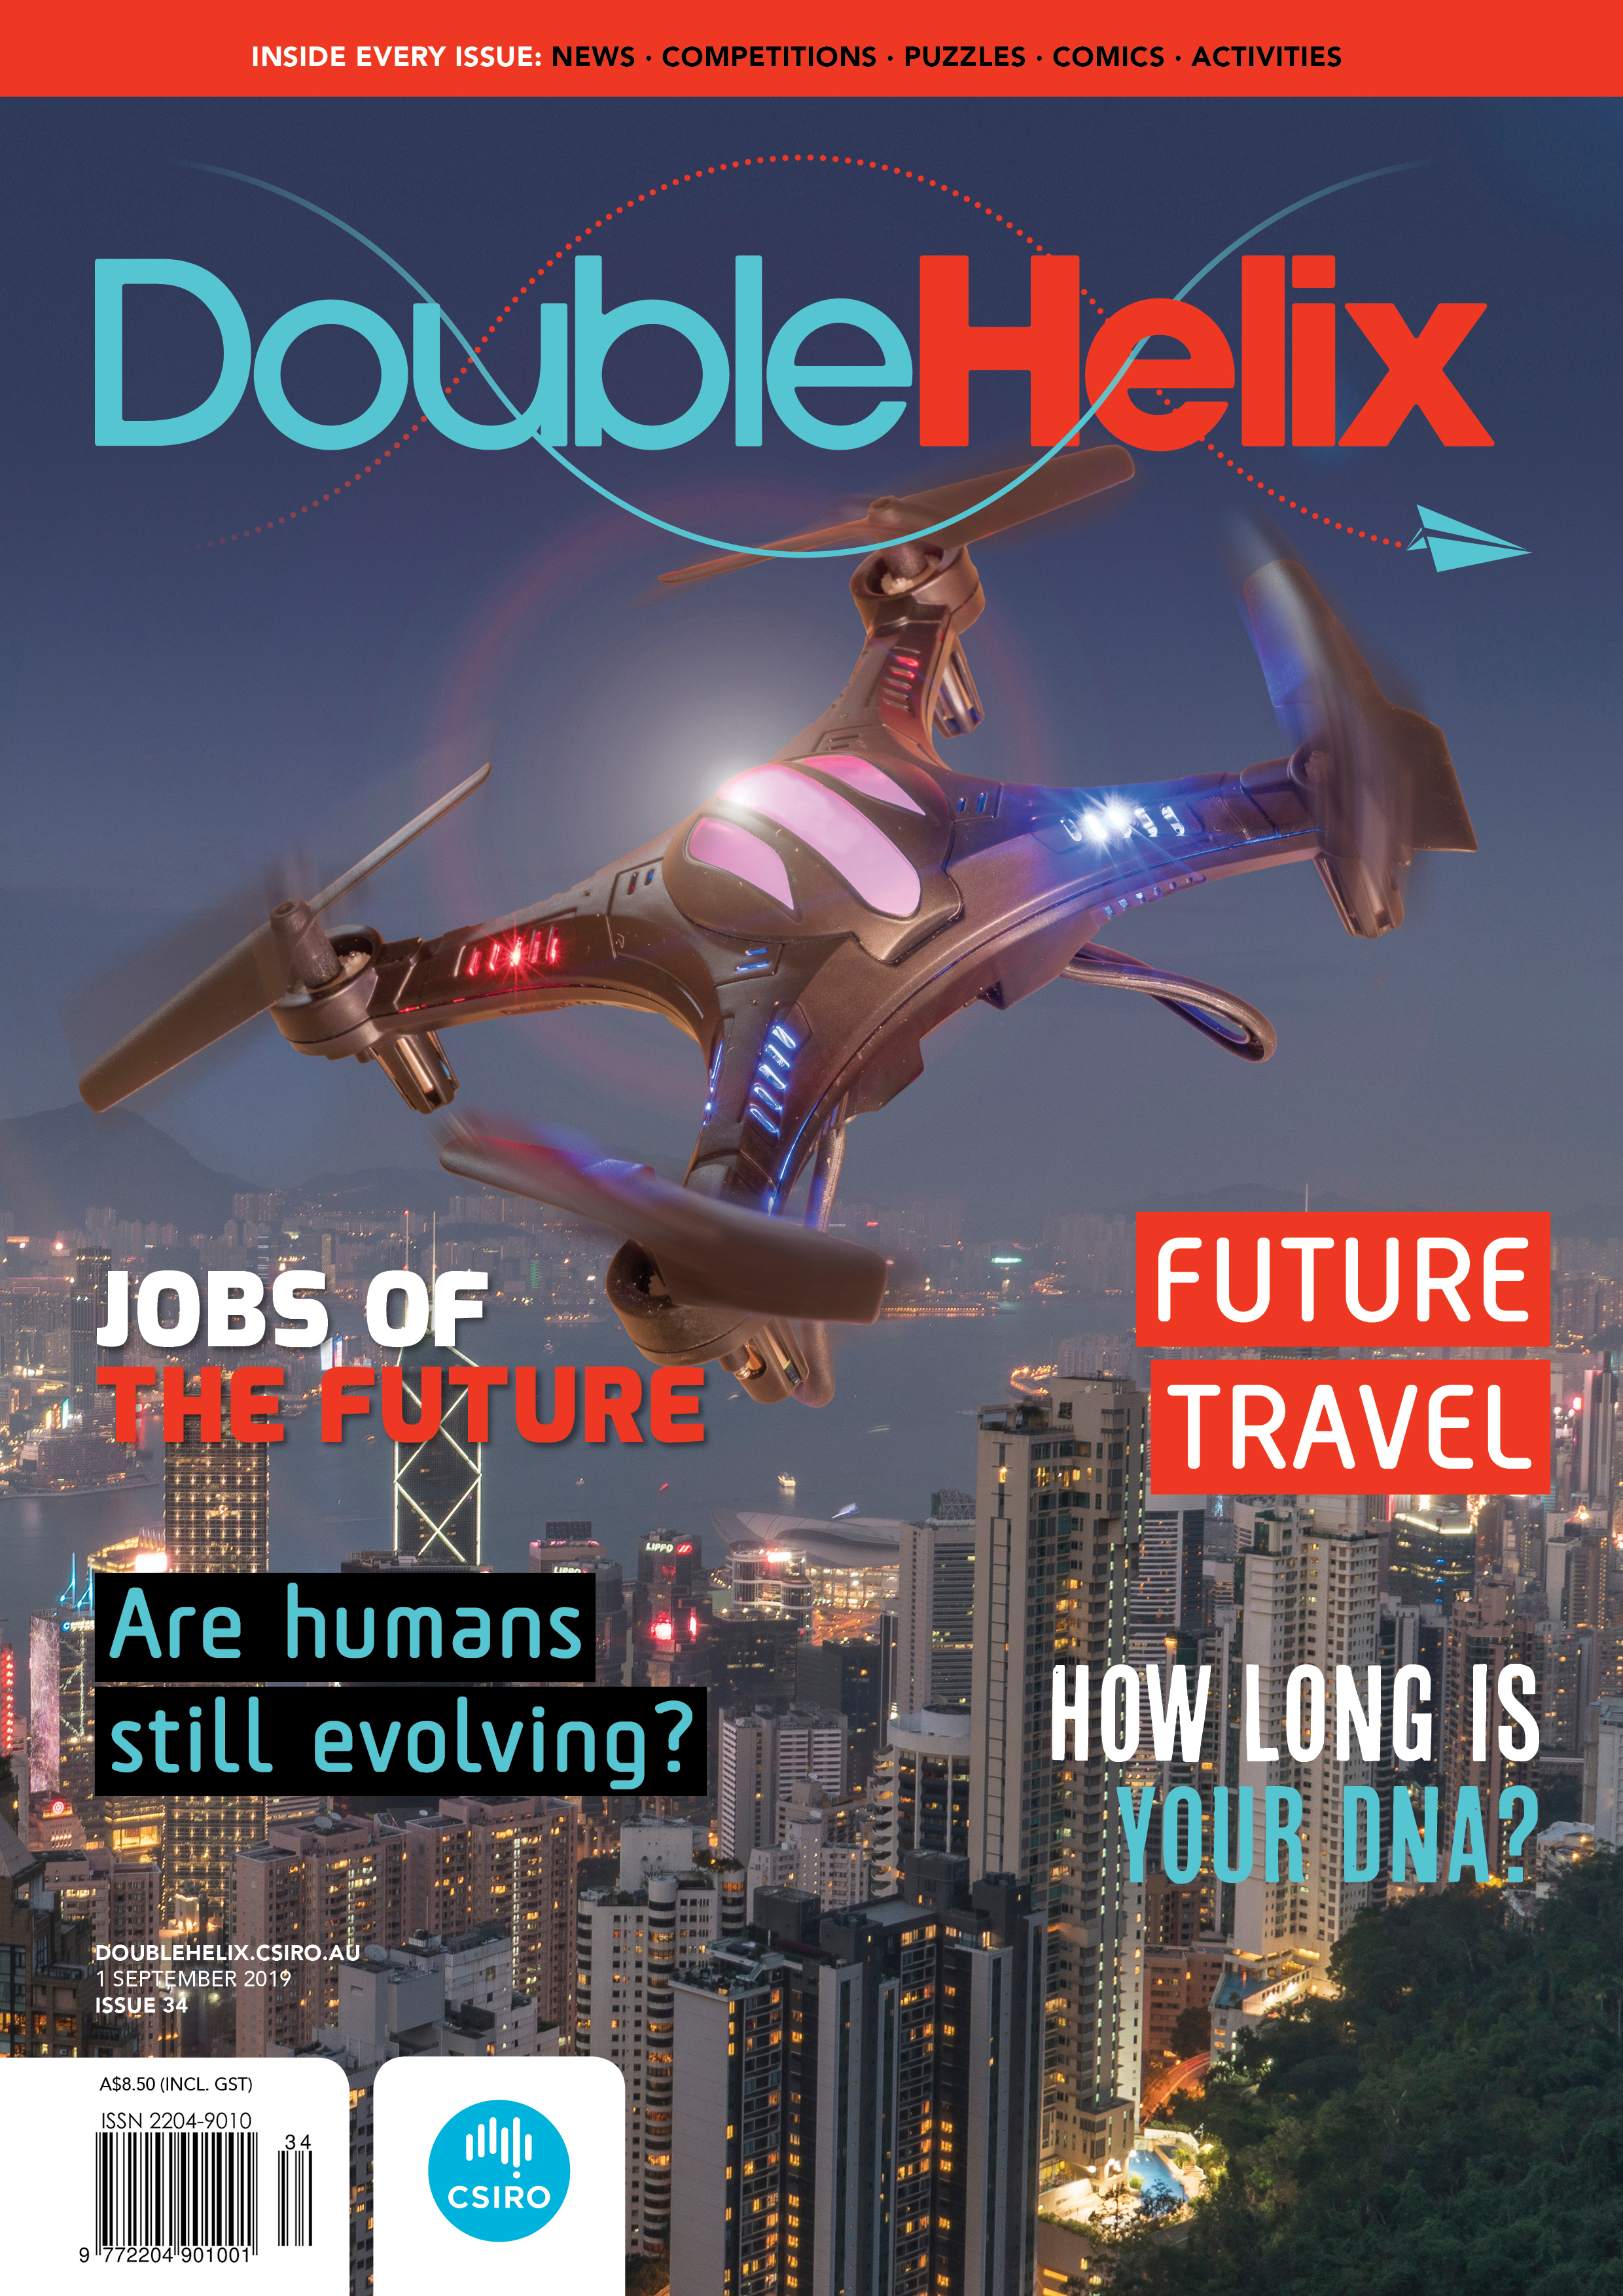 Cover of Double Helix magazine Issue 34 showing a large quadcopter flying above a city.